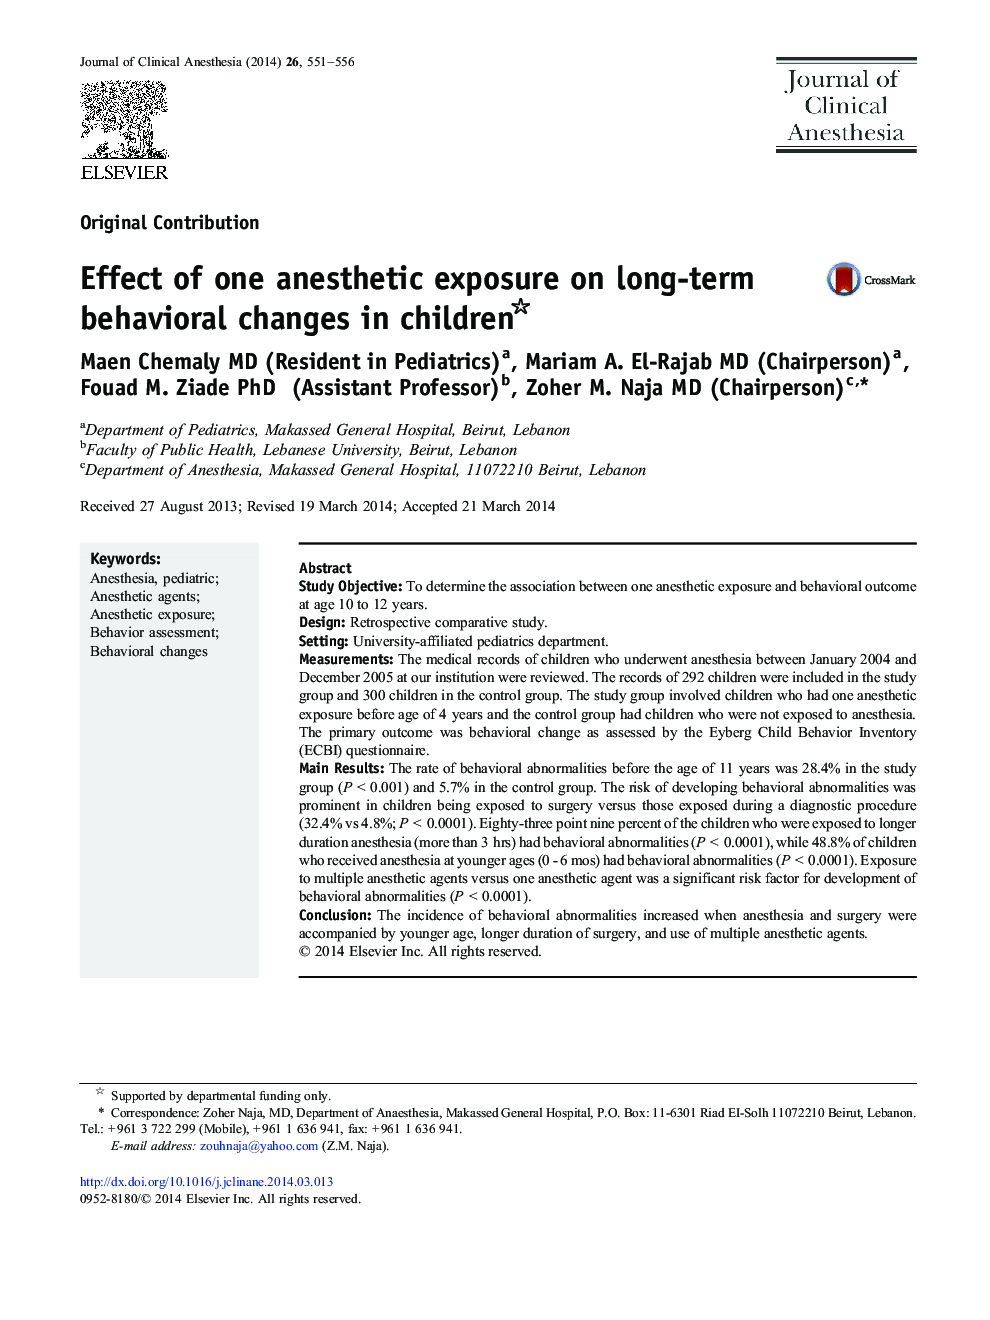 Effect of one anesthetic exposure on long-term behavioral changes in children 